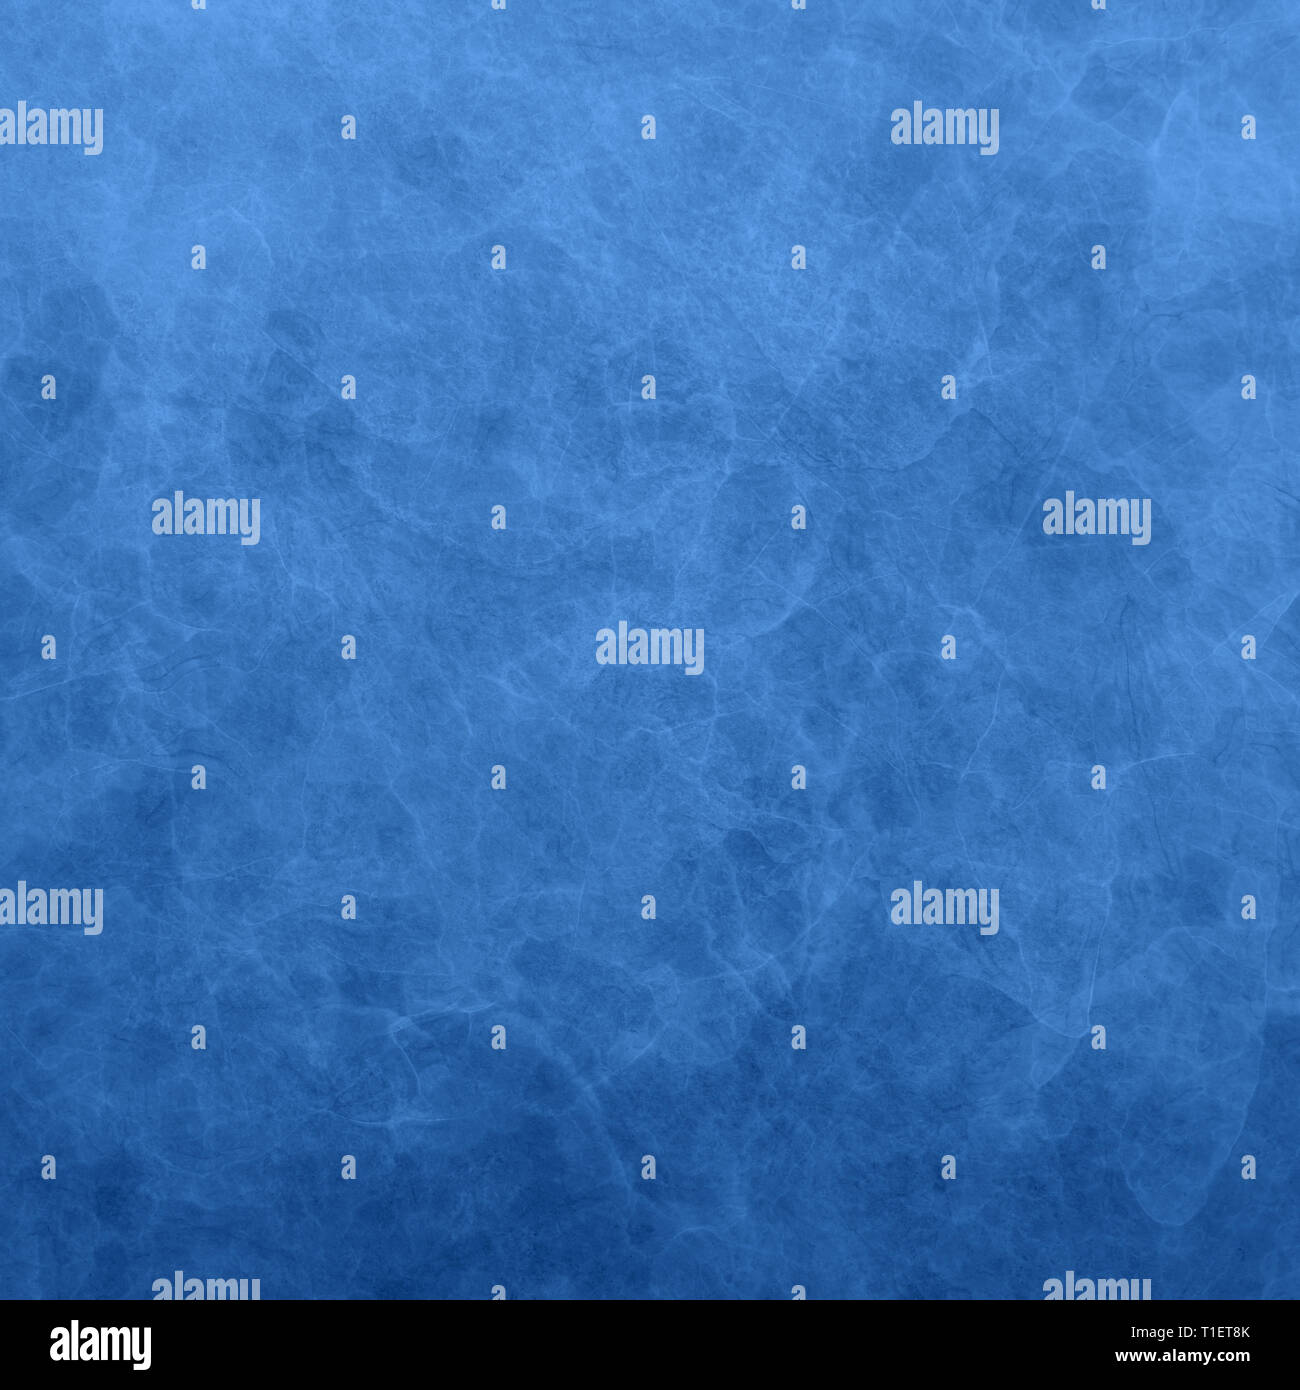 Elegant blue background with marbled or crackled stone texture in an old vintage design Stock Photo